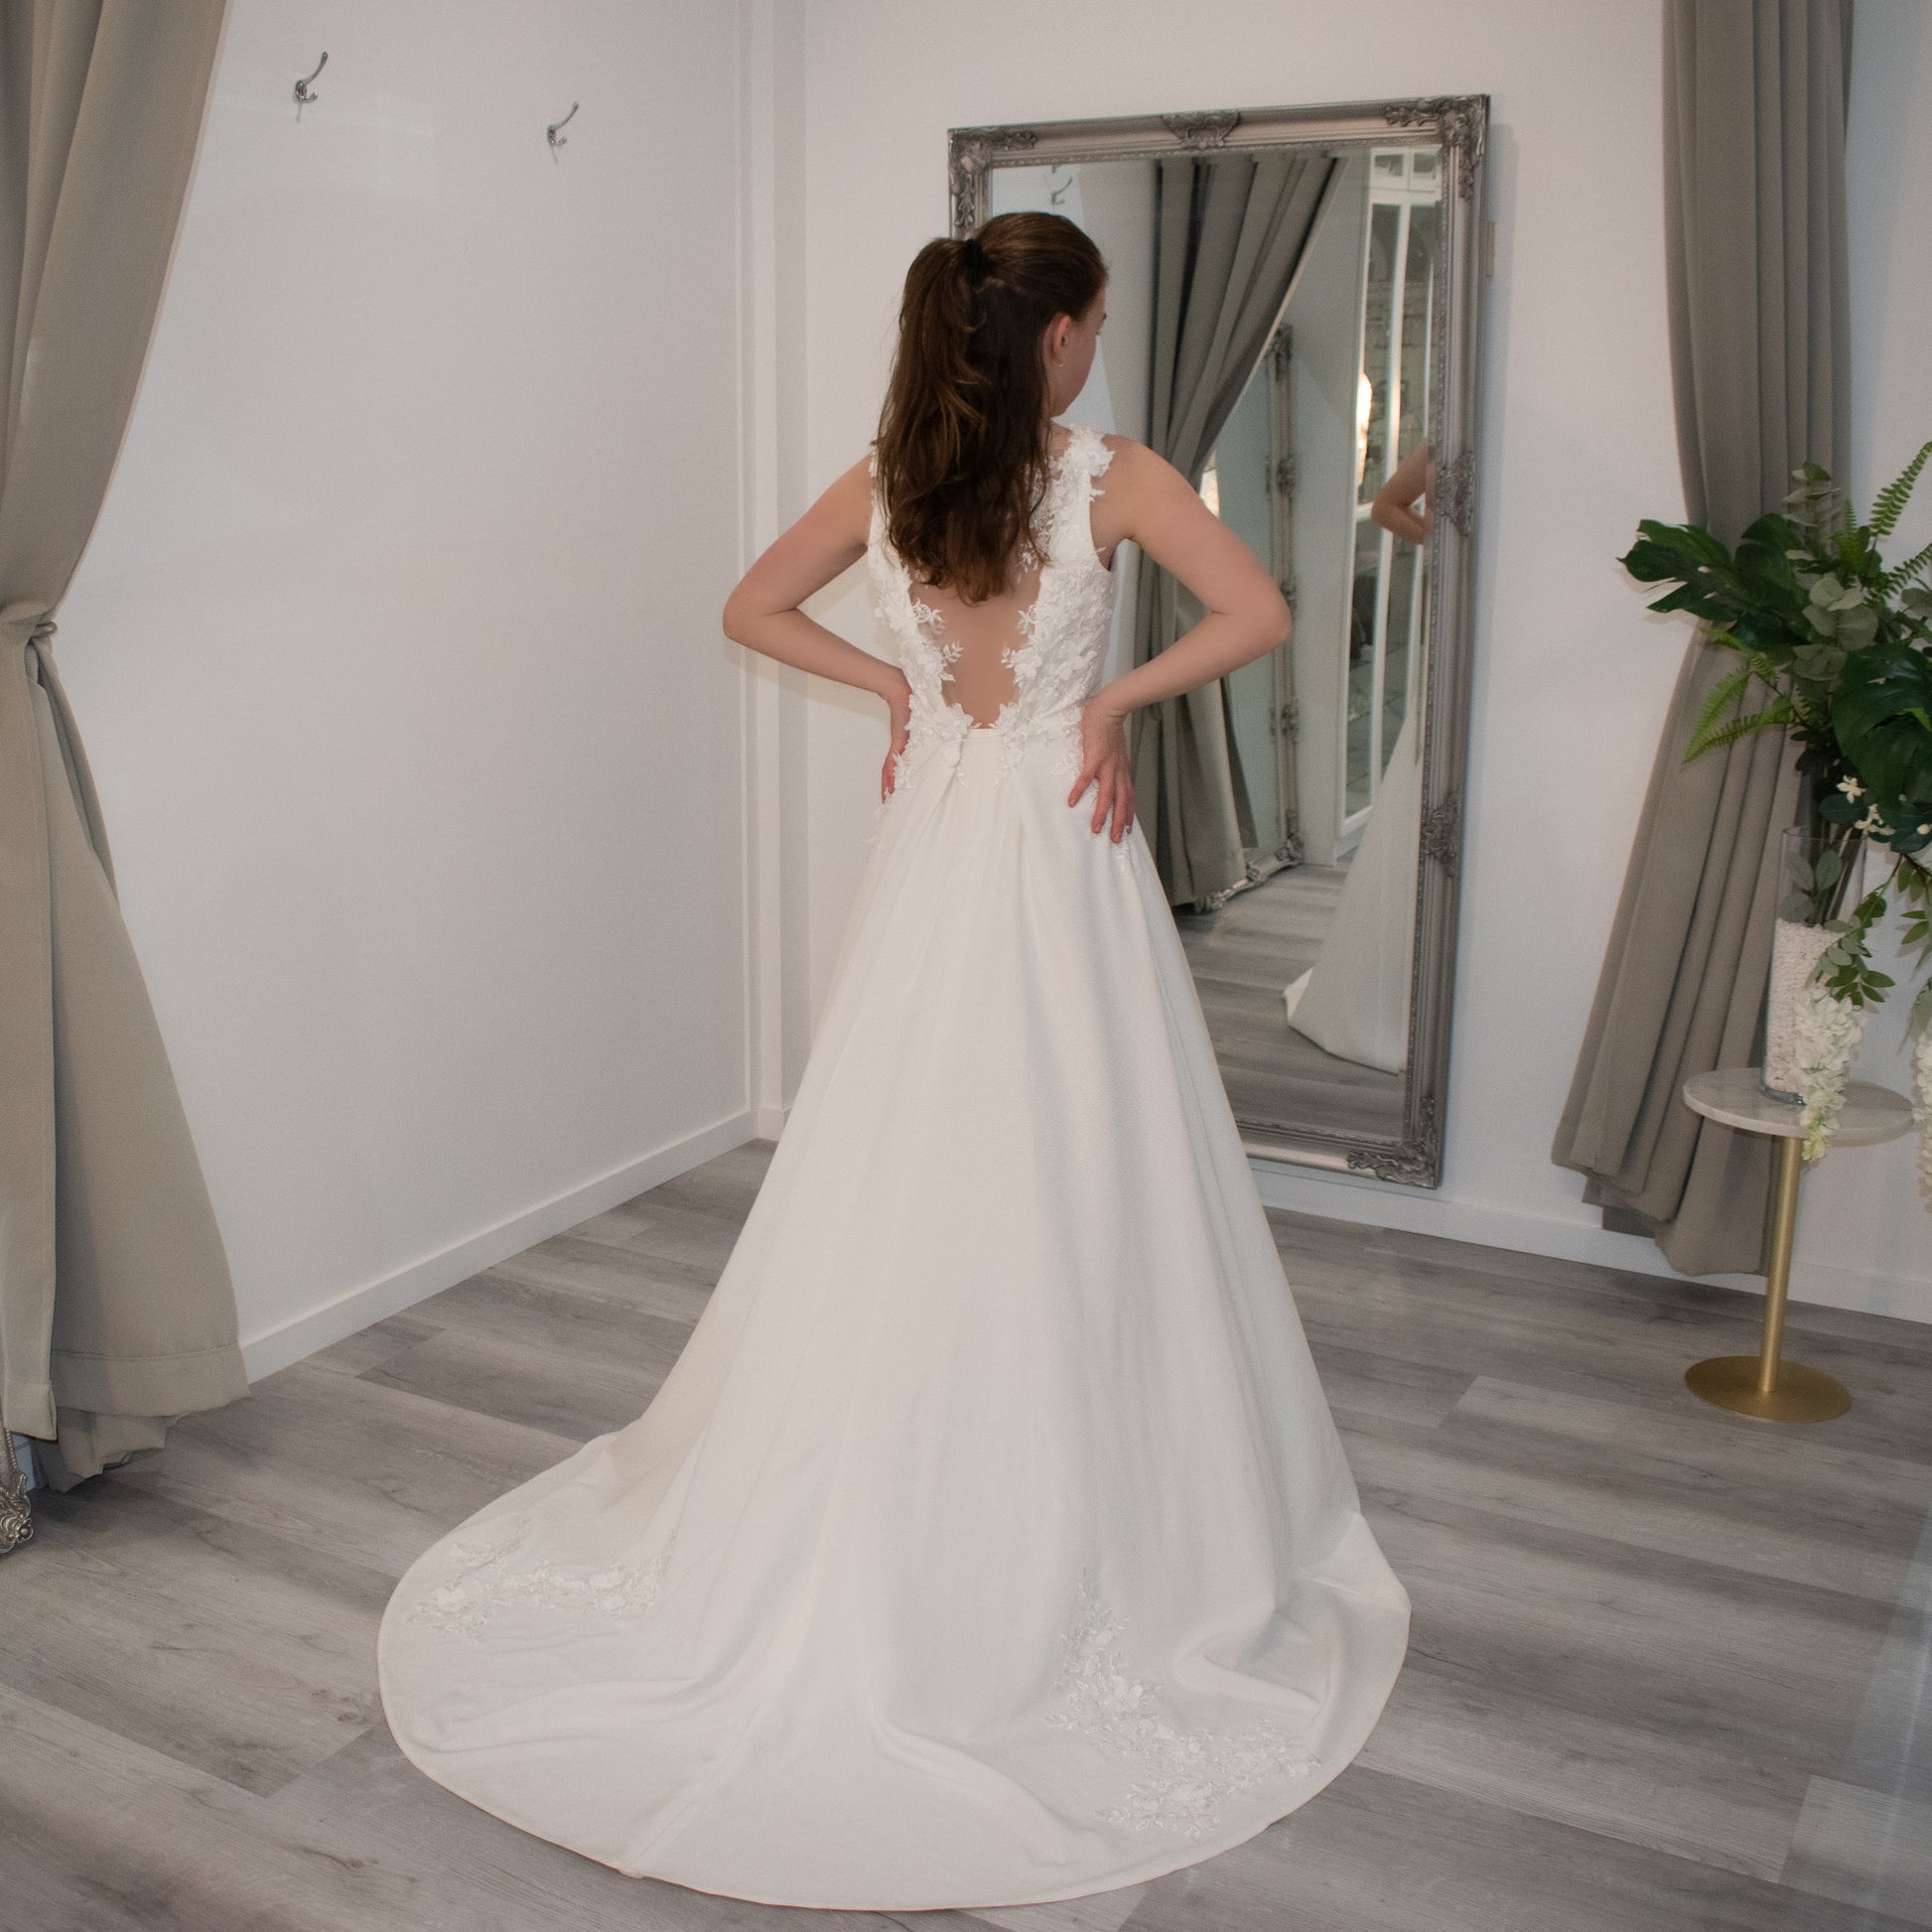 Bride donned in Aria wedding gown with a square neckline, illusion back adorned with 3-D lace, and a cascading chapel train.